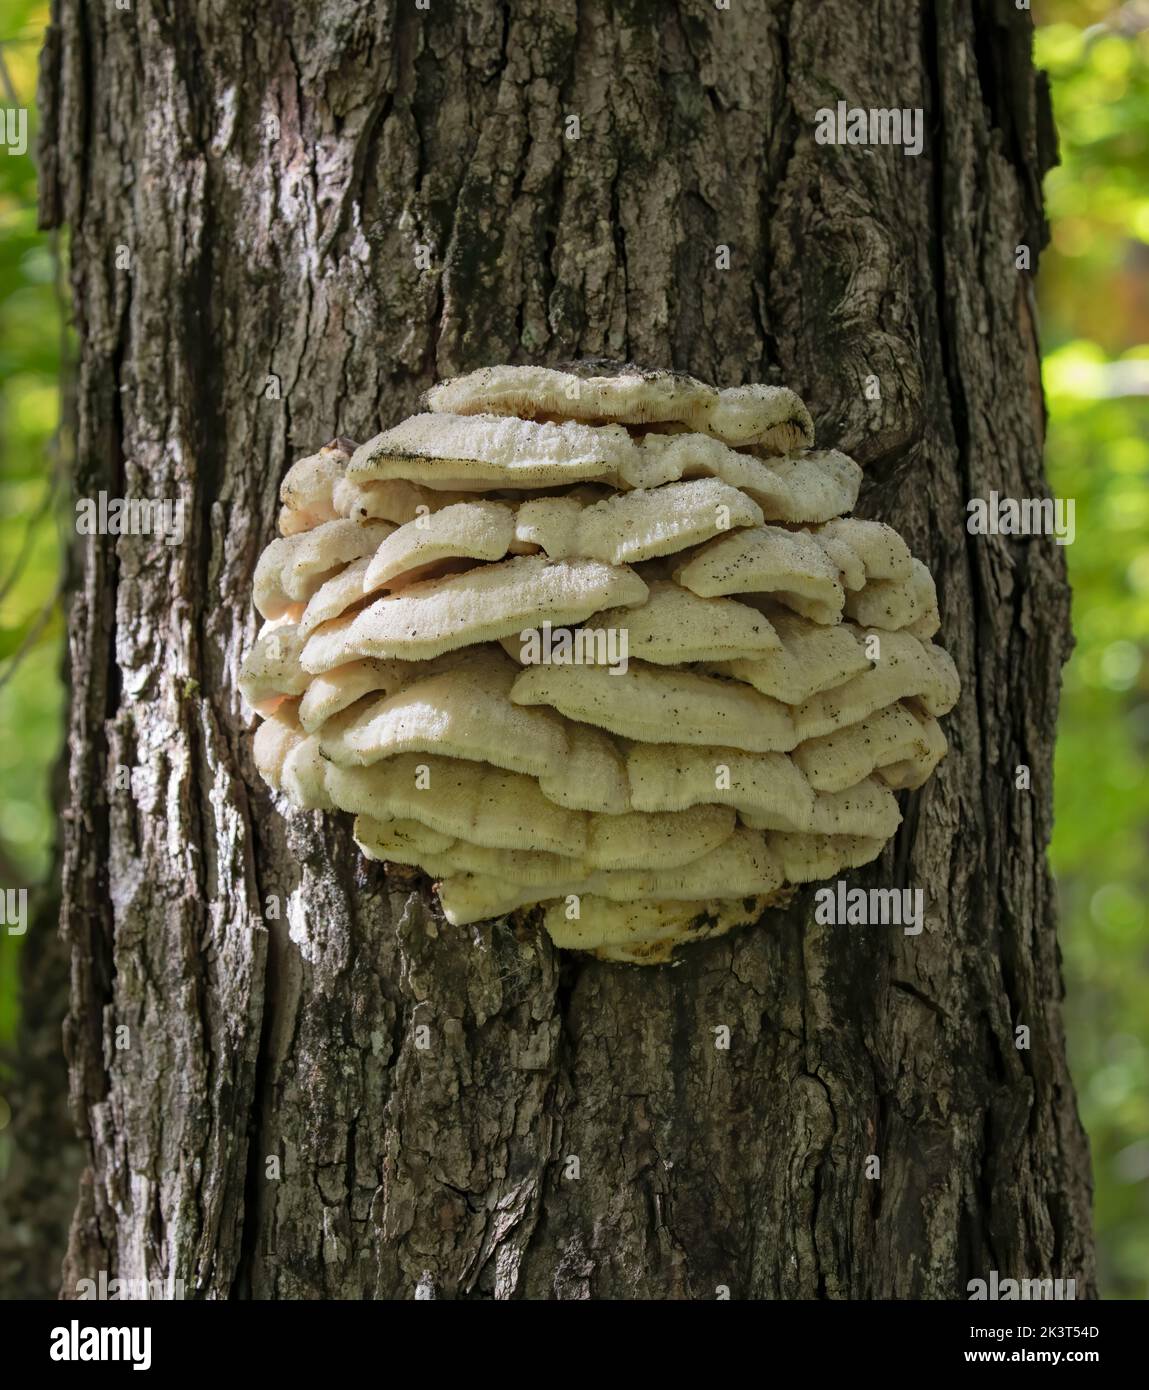 Northern Tooth Fungus growing on maple tree in Algonquin Park, Canada Stock Photo